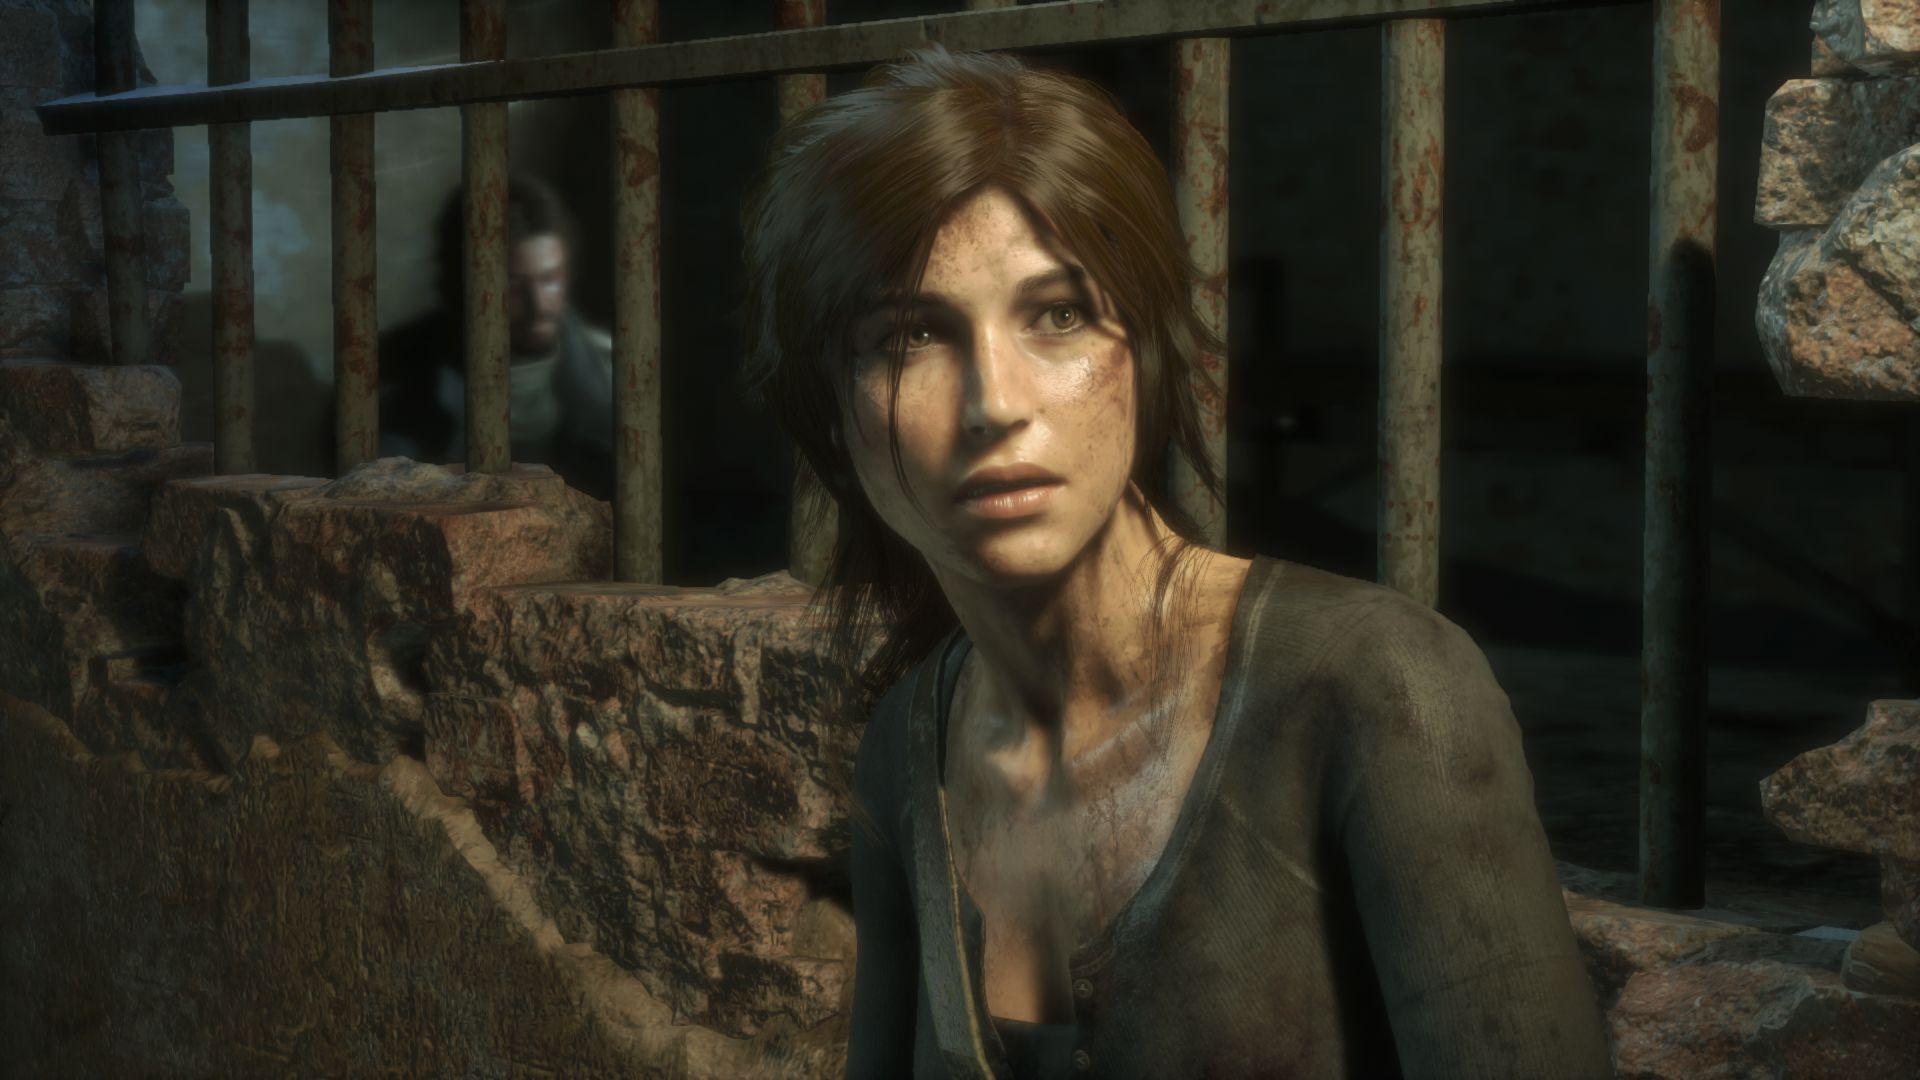 Rise of the Tomb Raider PC January Release Date Confirmed Via Steam